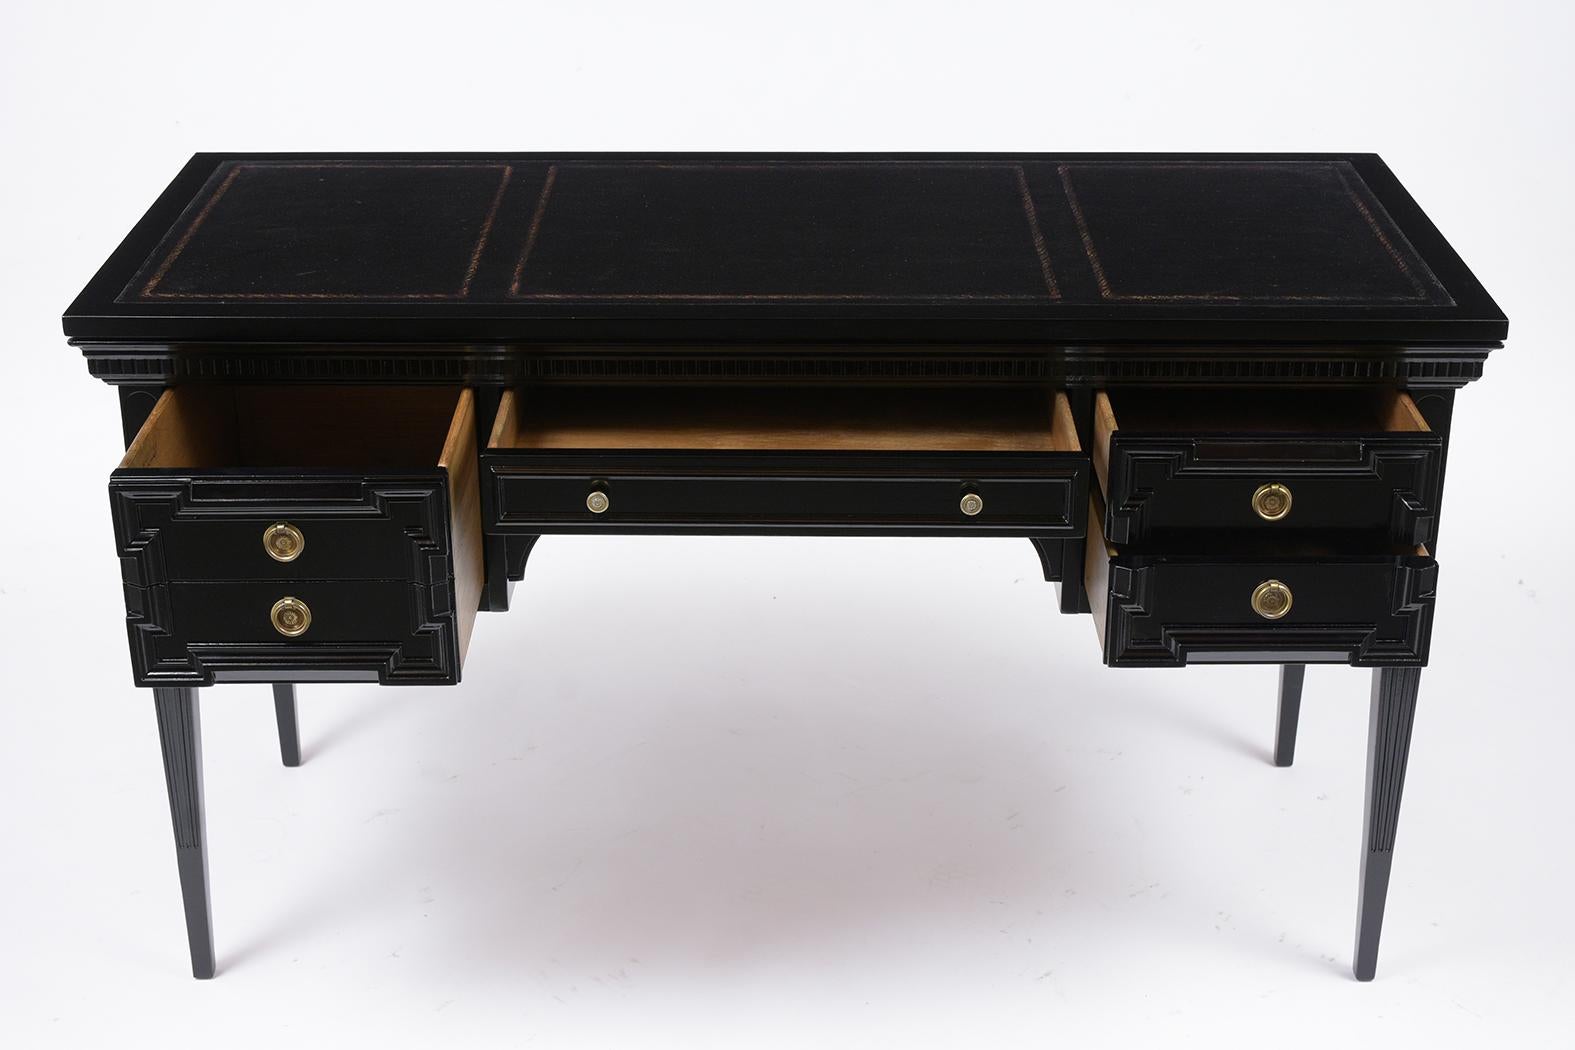 This Vintage Louis XVI Style Desk has been professionally restored and has been newly stained in black color with a lacquered finish. This desk features a black color faux leather top with embossed gilt garland pattern details, center drawer with